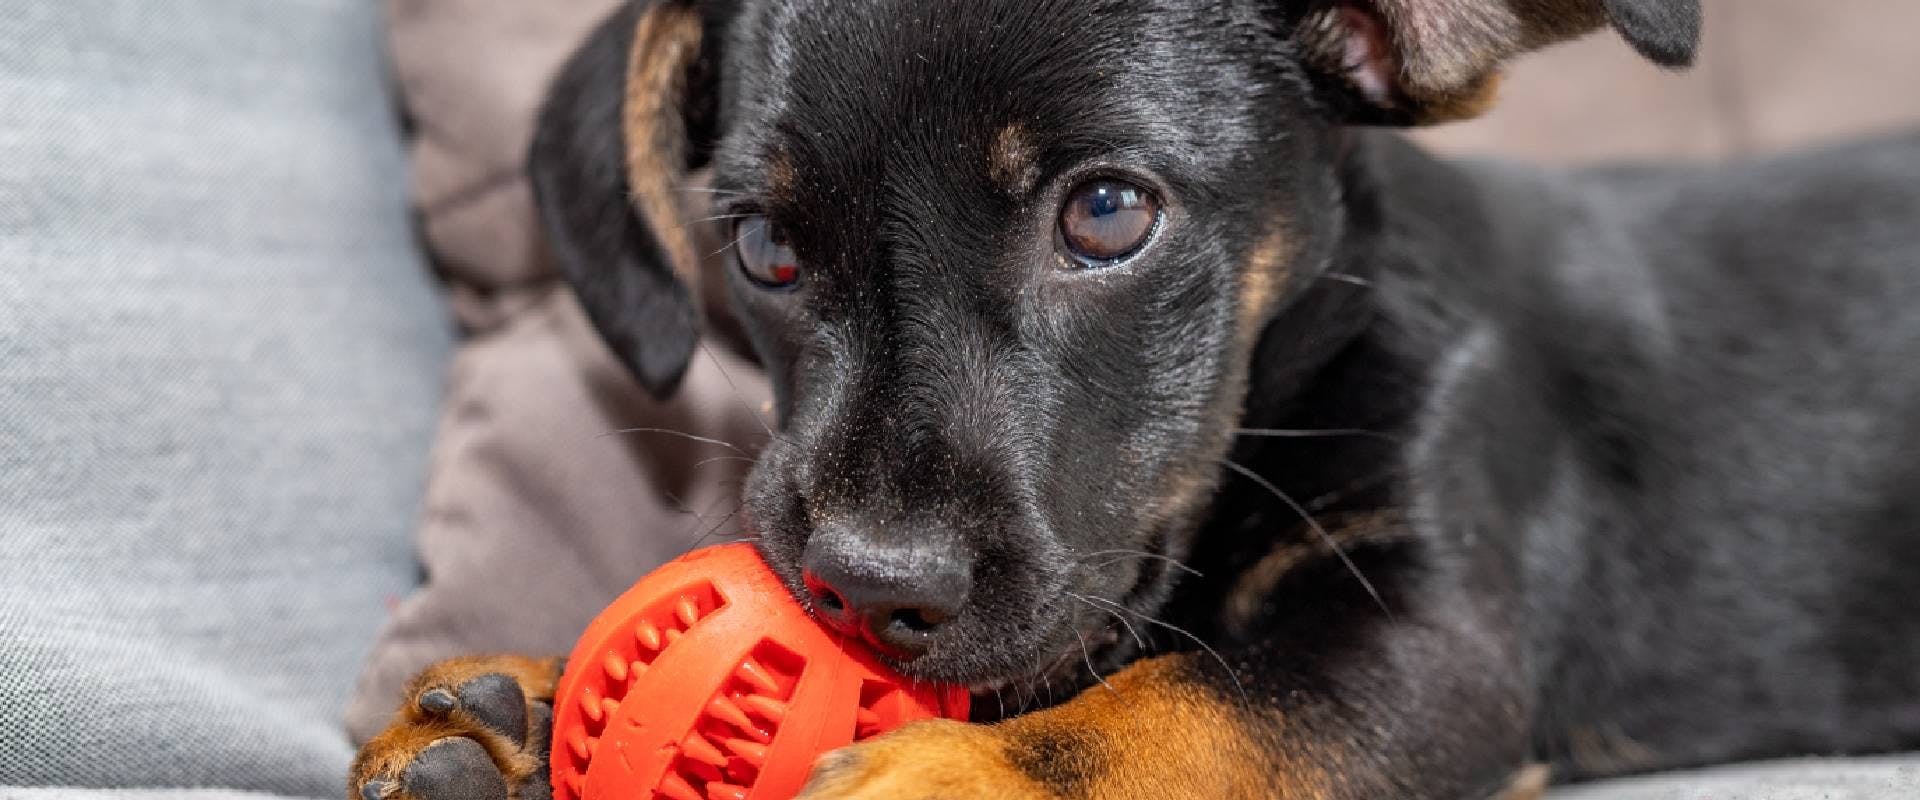 Rottweiler puppy chewing on a toy